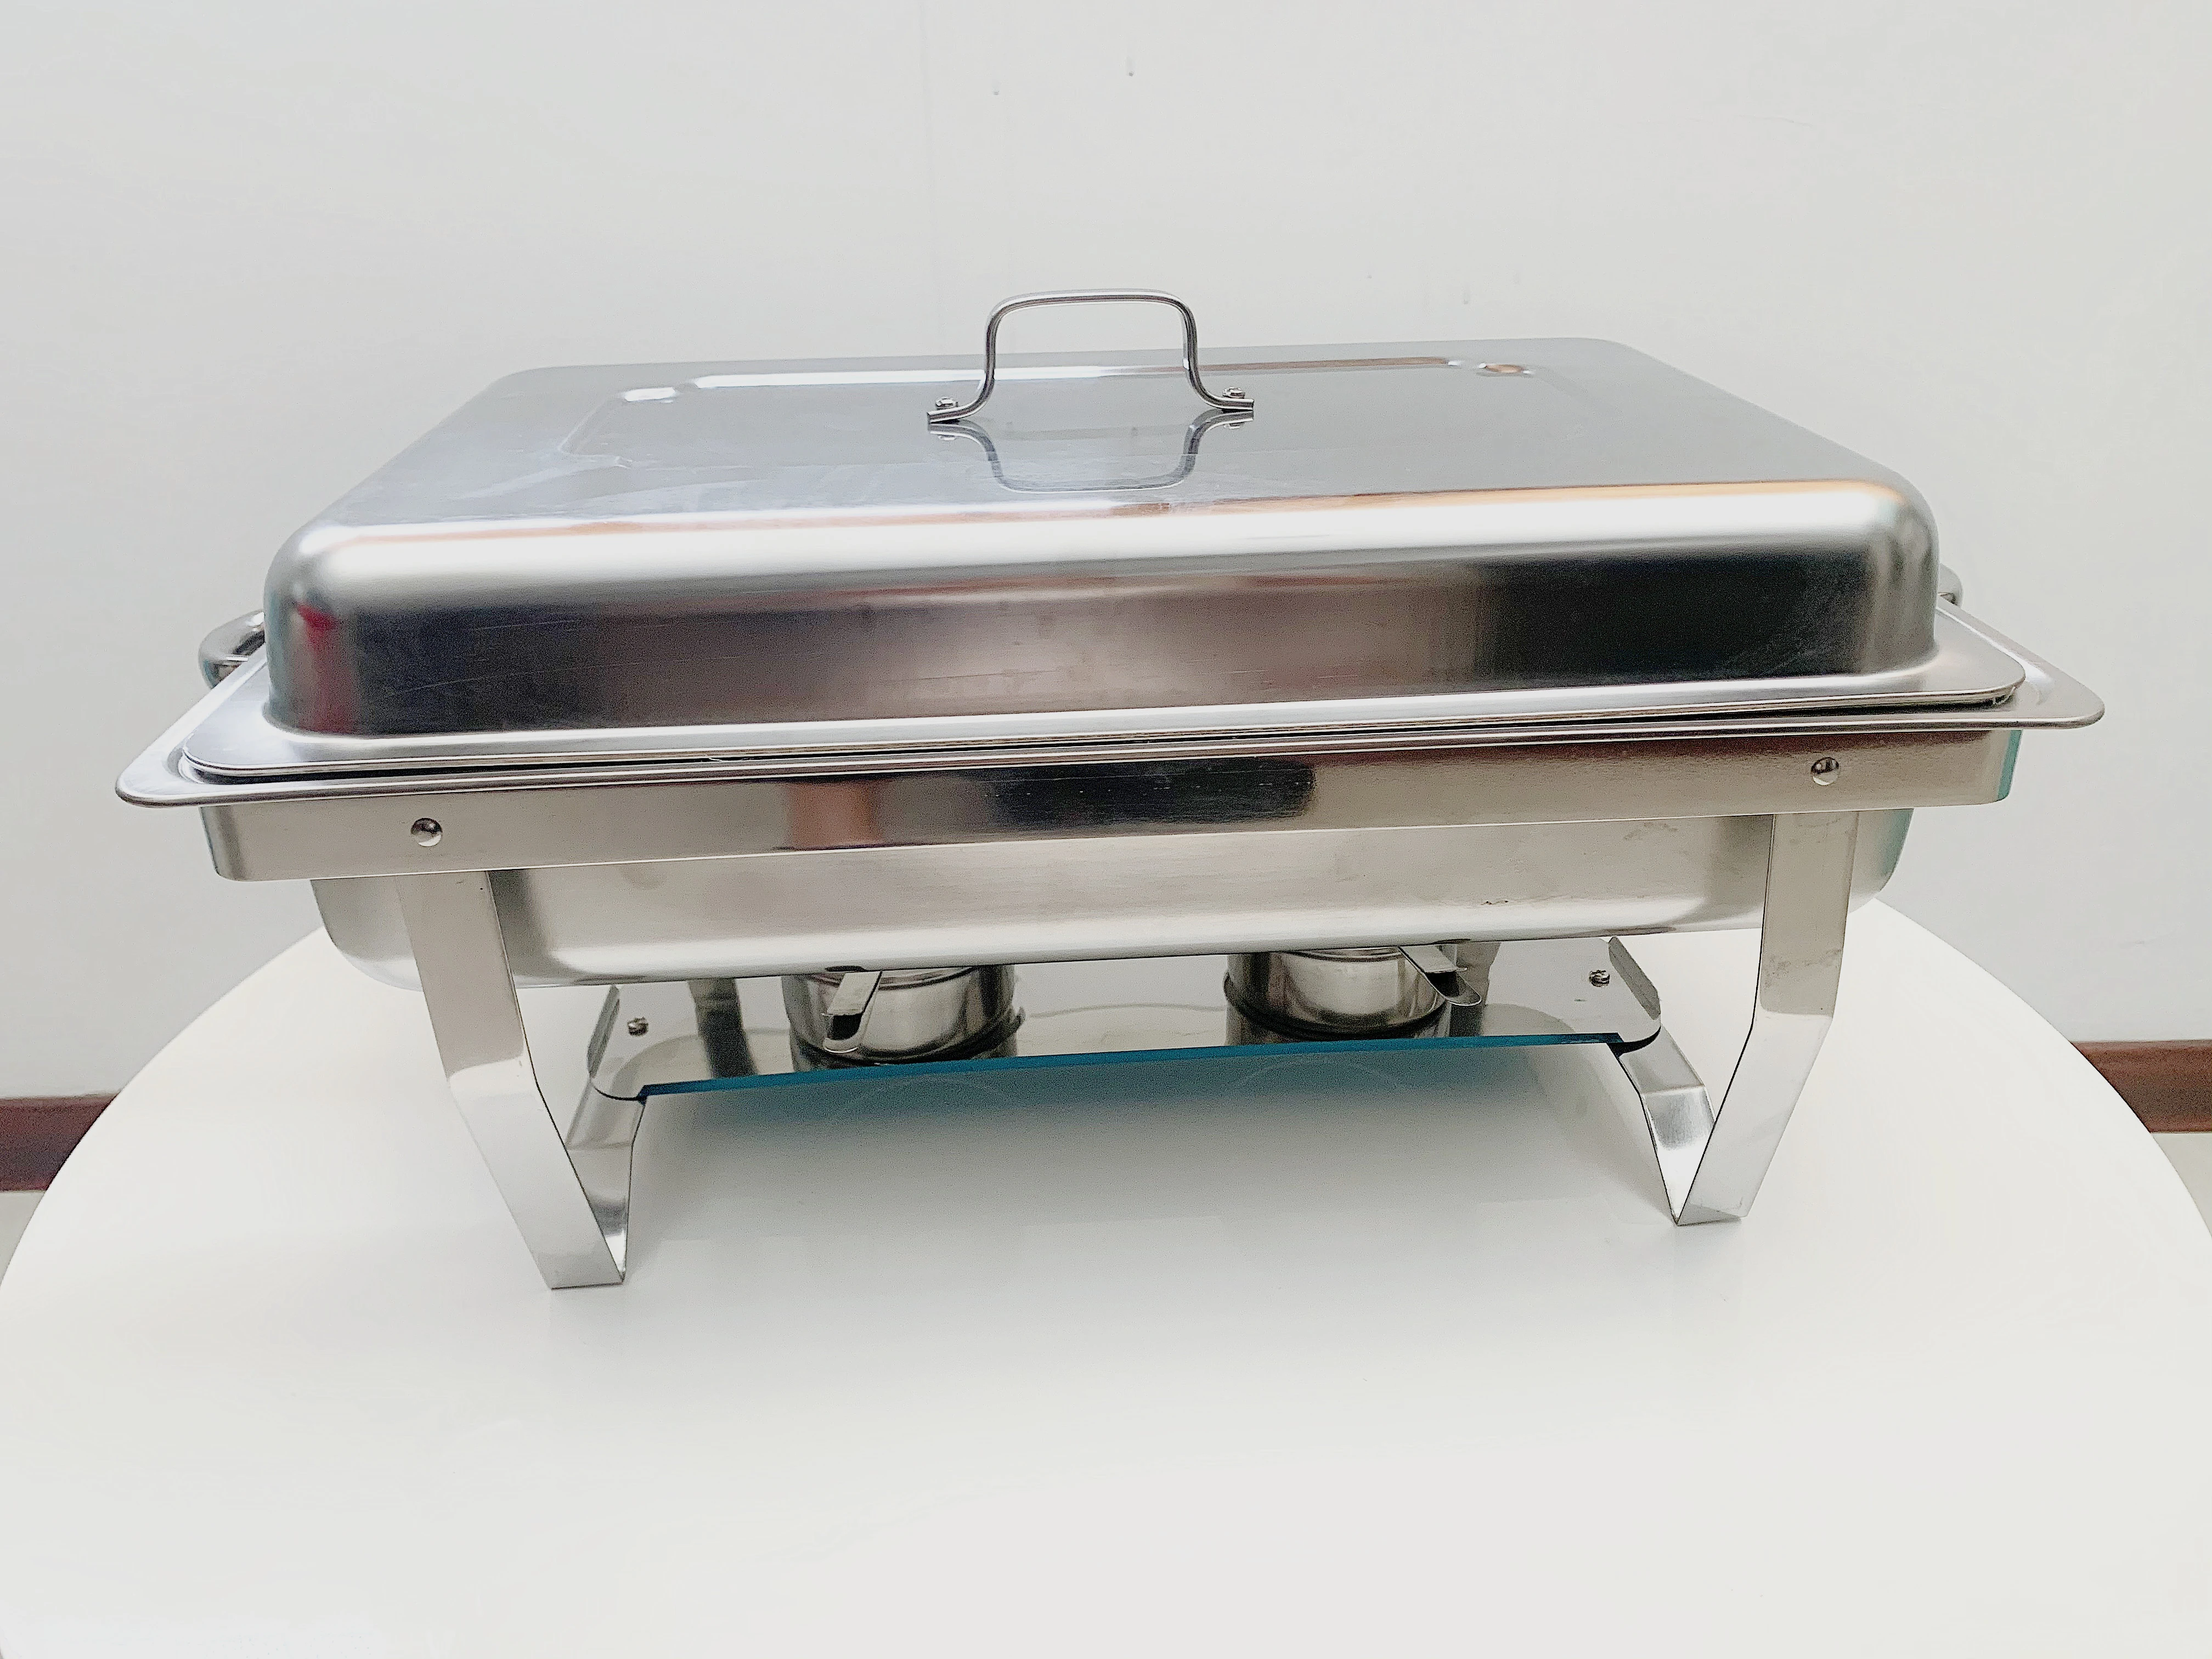 https://img2.tradewheel.com/uploads/images/products/0/7/stainless-steel-buffet-stove-hot-pot-material-catering-restaurant-equipment-cafe-butter-food-warmer-chafing-dish1-0866718001623399970.jpg.webp